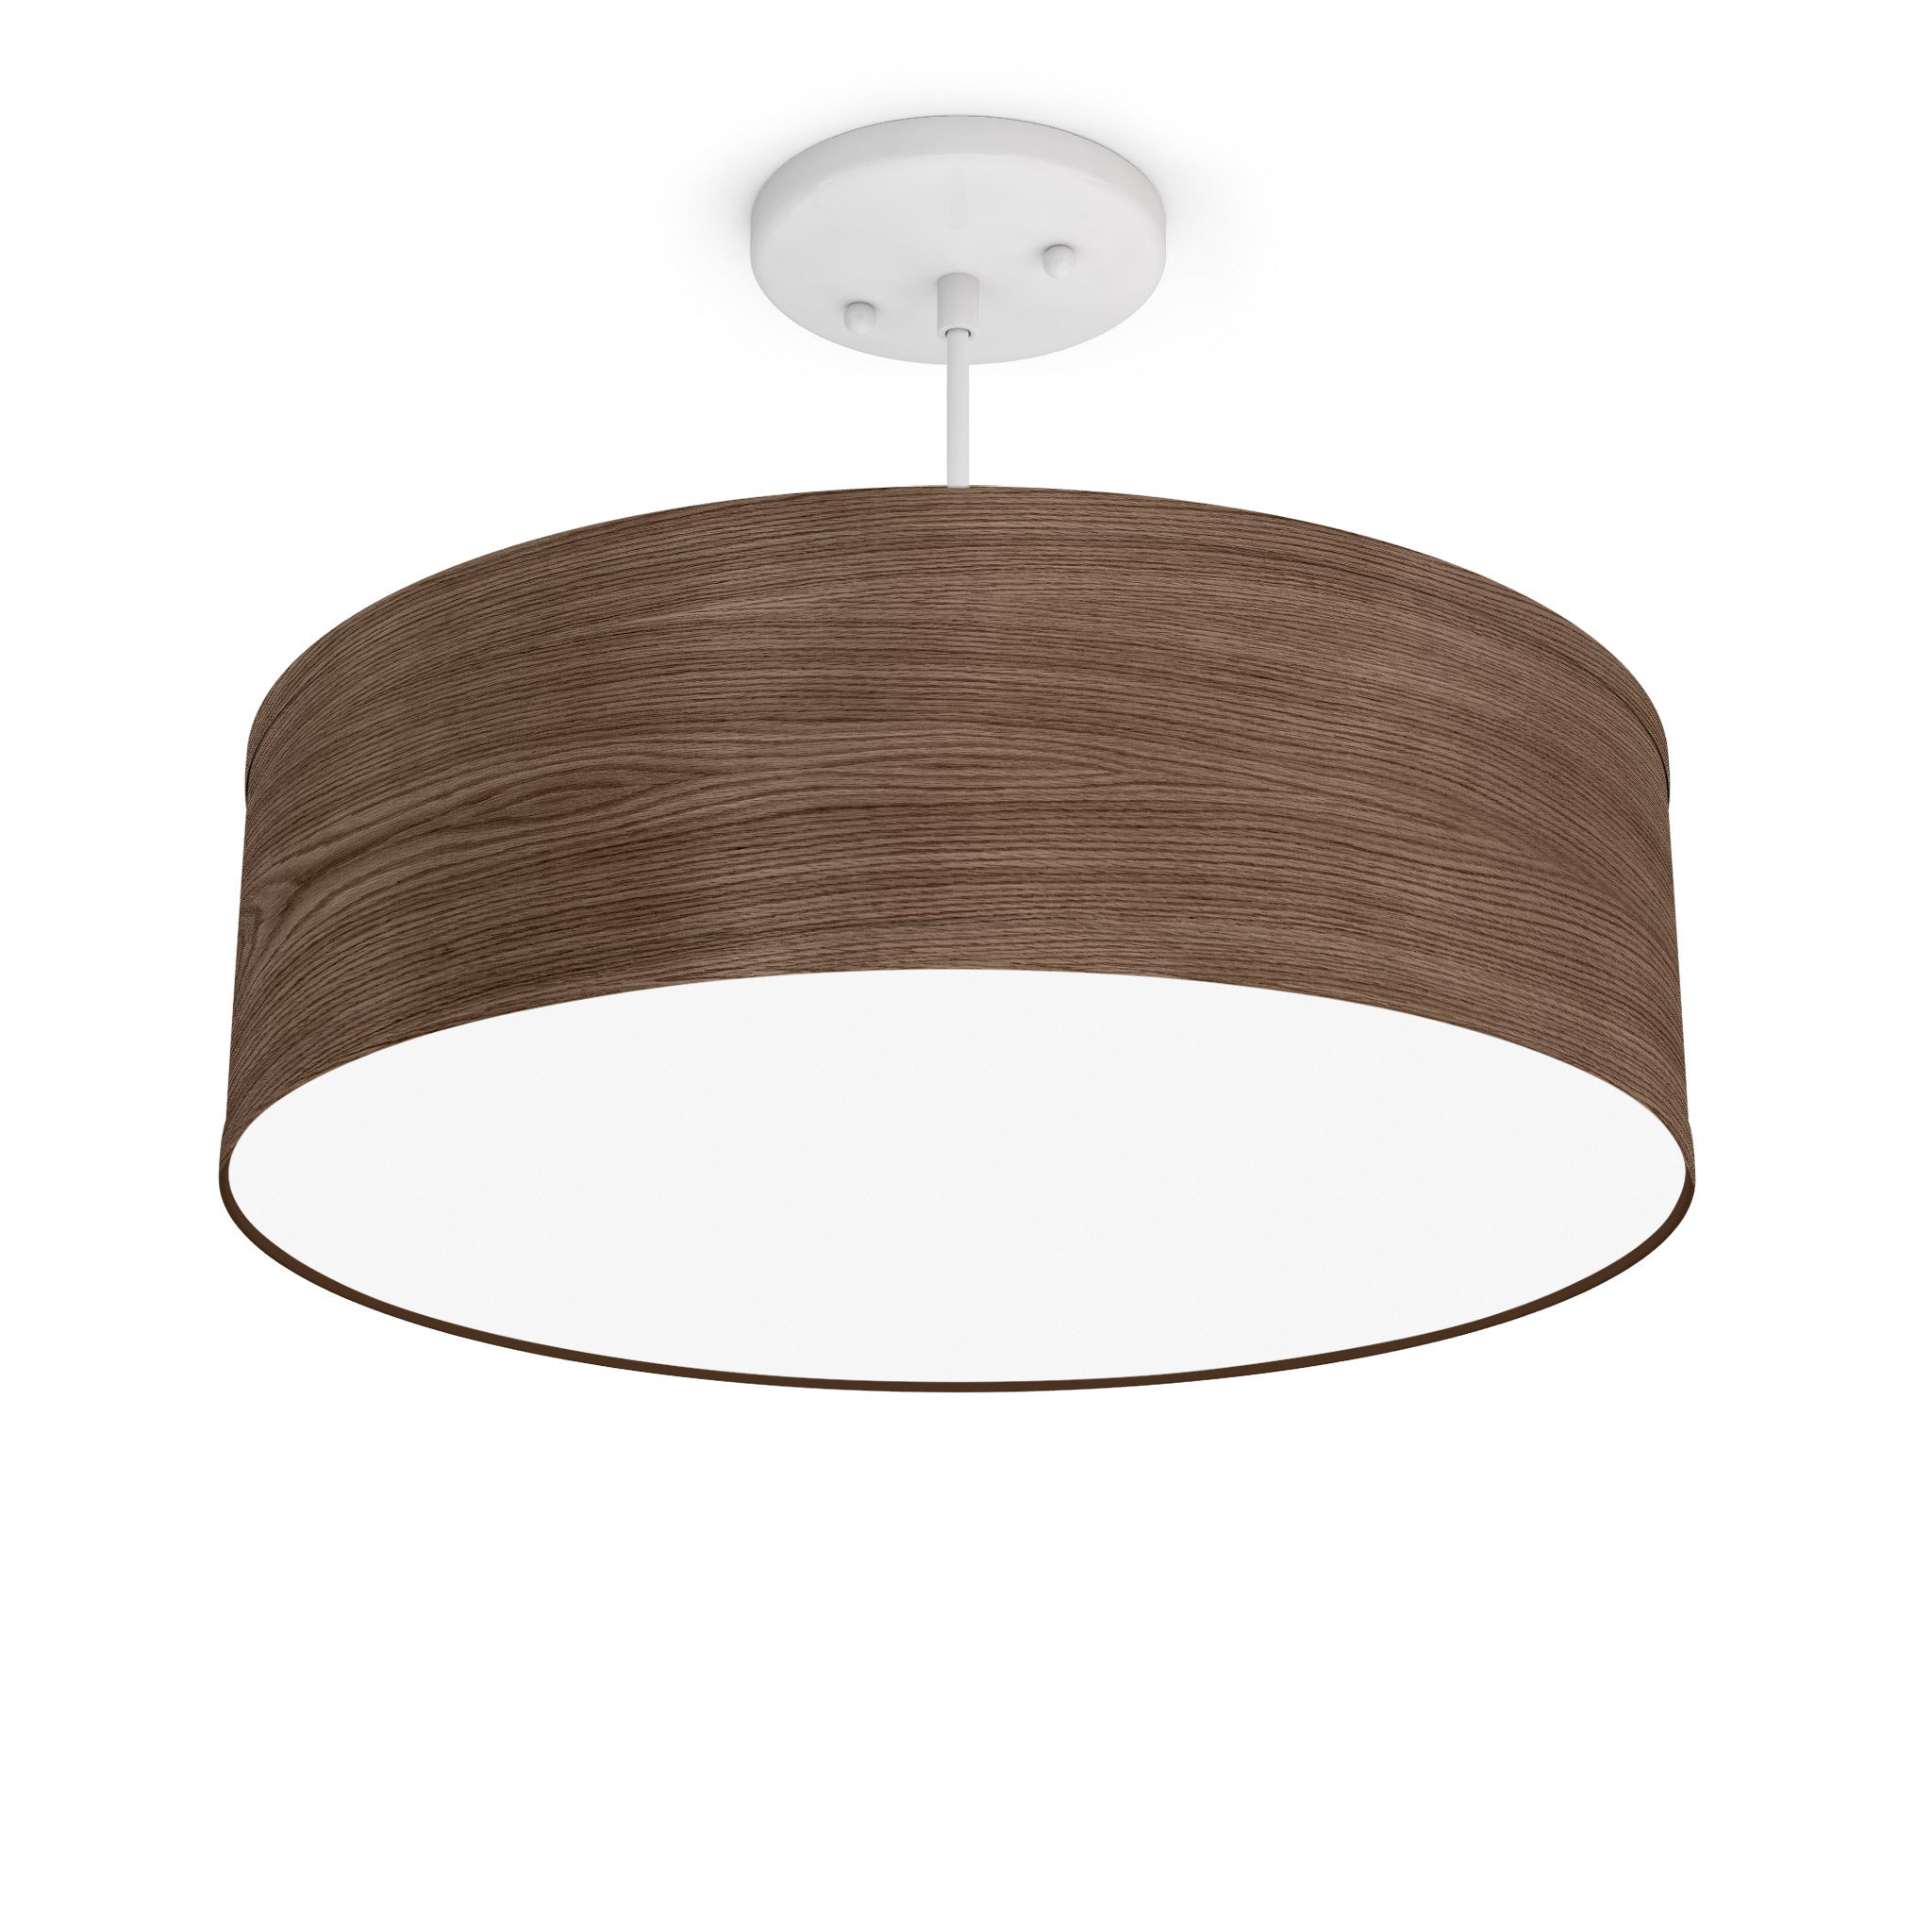 The Sheila Hanging Lamp from Seascape Fixtures with the white base in photo veneer, walnut color.